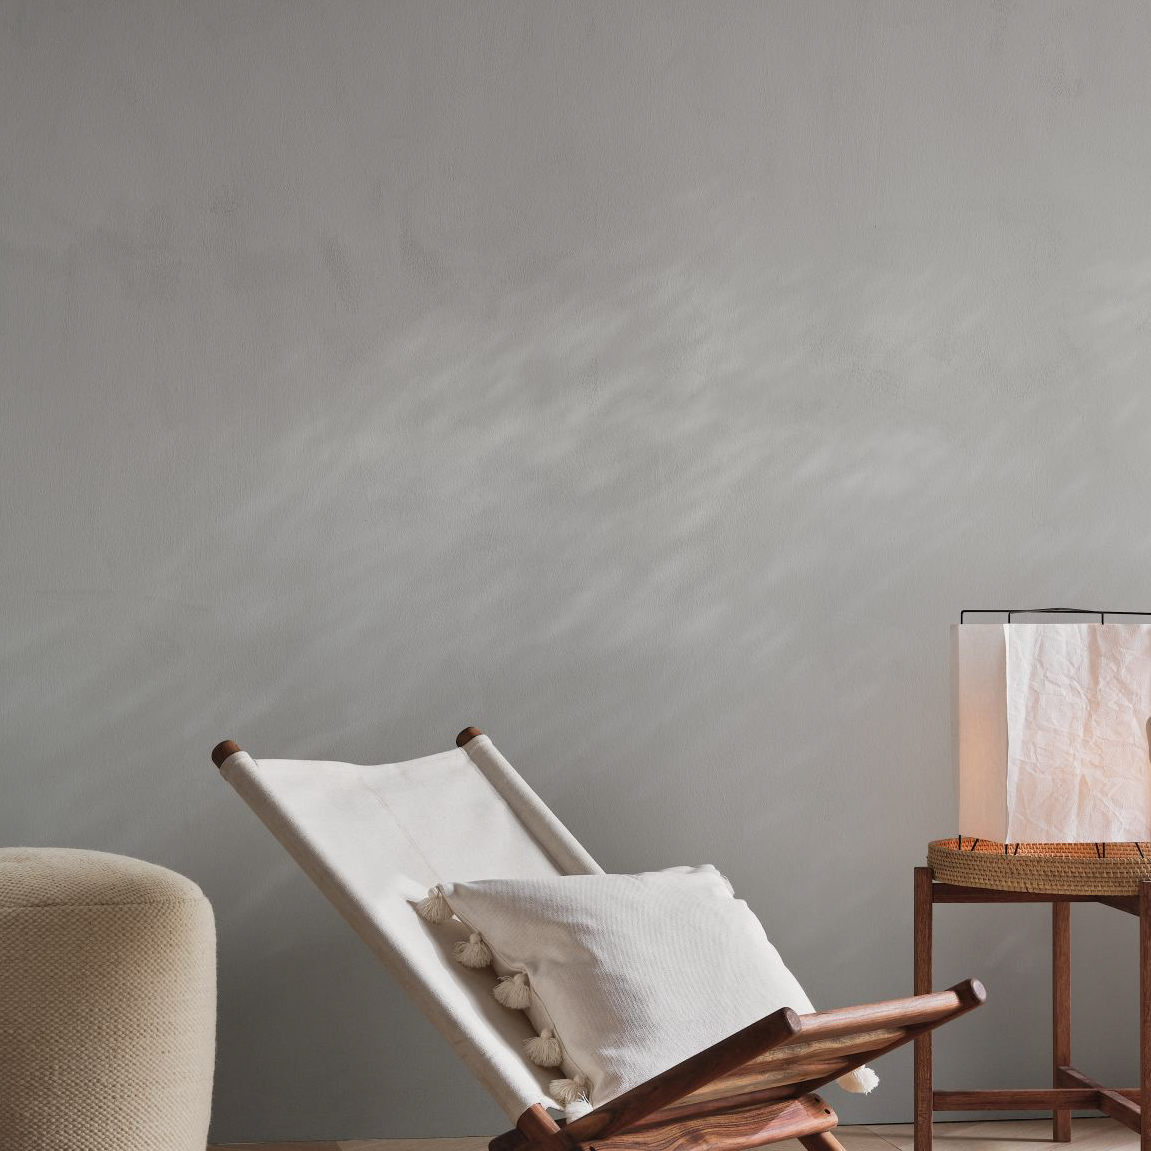 Creating Warmth and Style with Handcrafted Wooden Lamp Designs